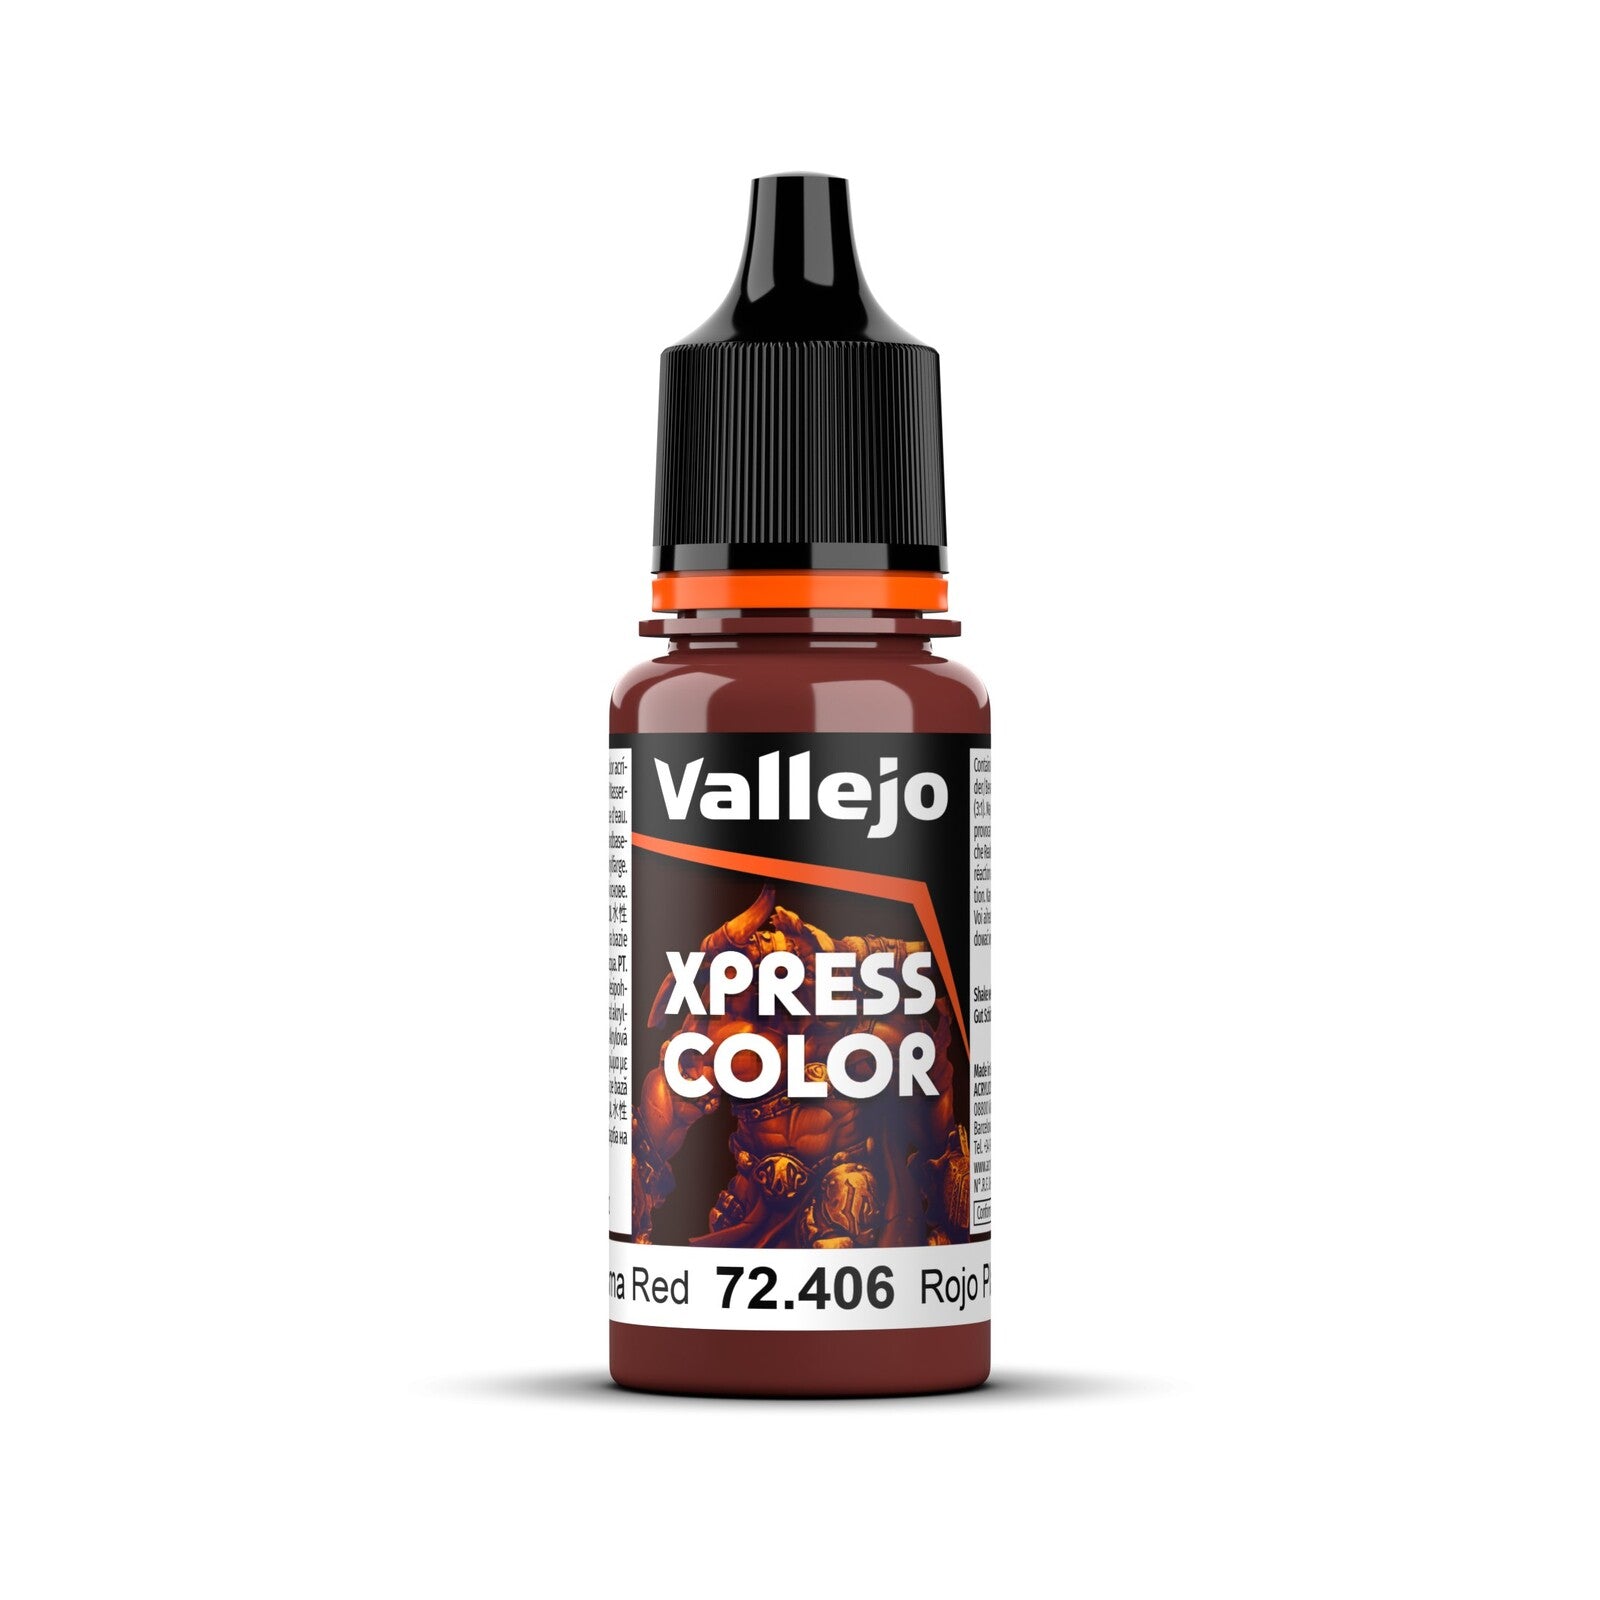 Vallejo Game Colour Xpress Color Plasma Red 18ml Acrylic Paint - New Formulation